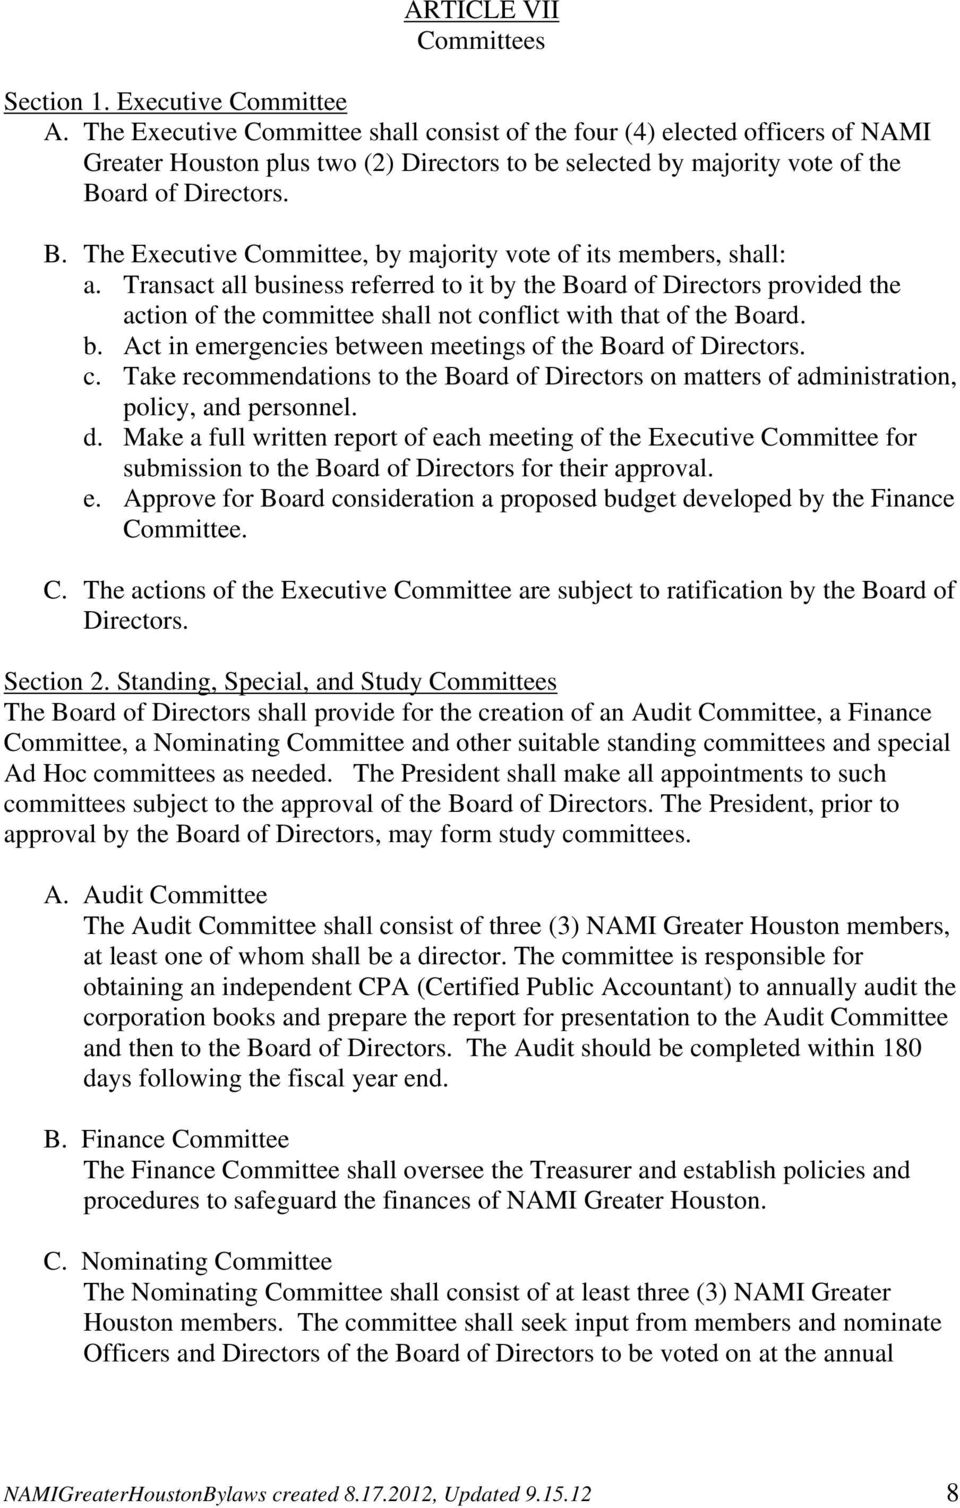 ard of Directors. B. The Executive Committee, by majority vote of its members, shall: a.